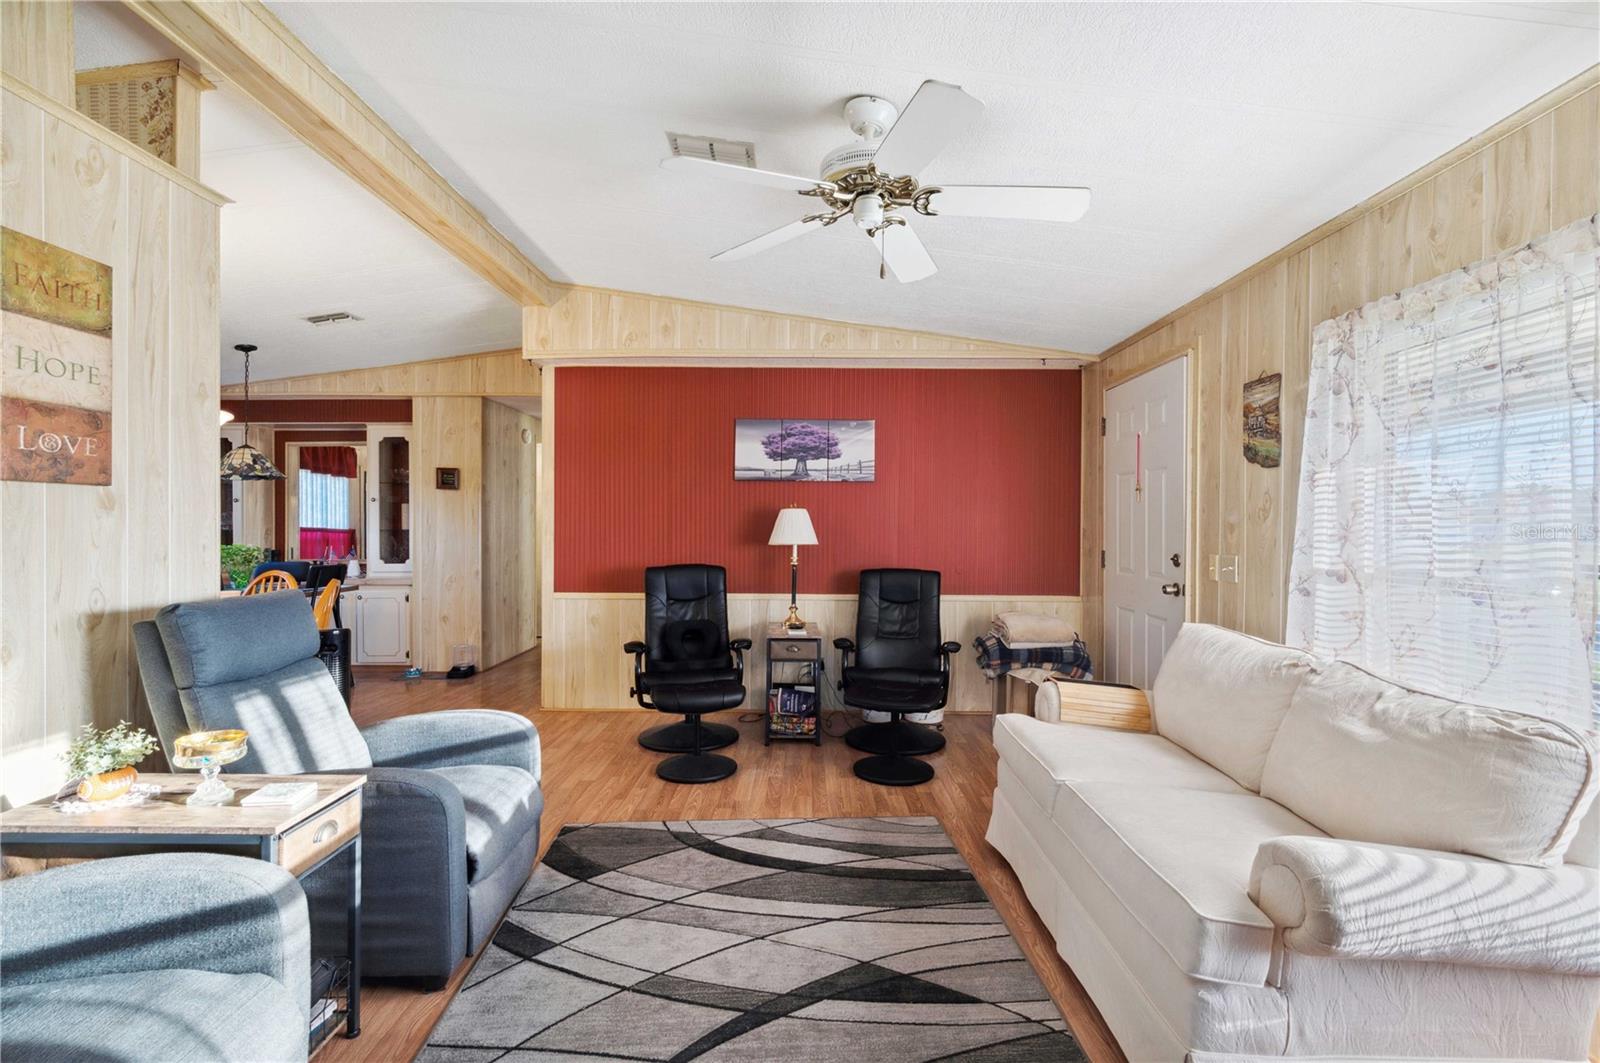 Living room has laminate floor, ceiling fan, and much more.